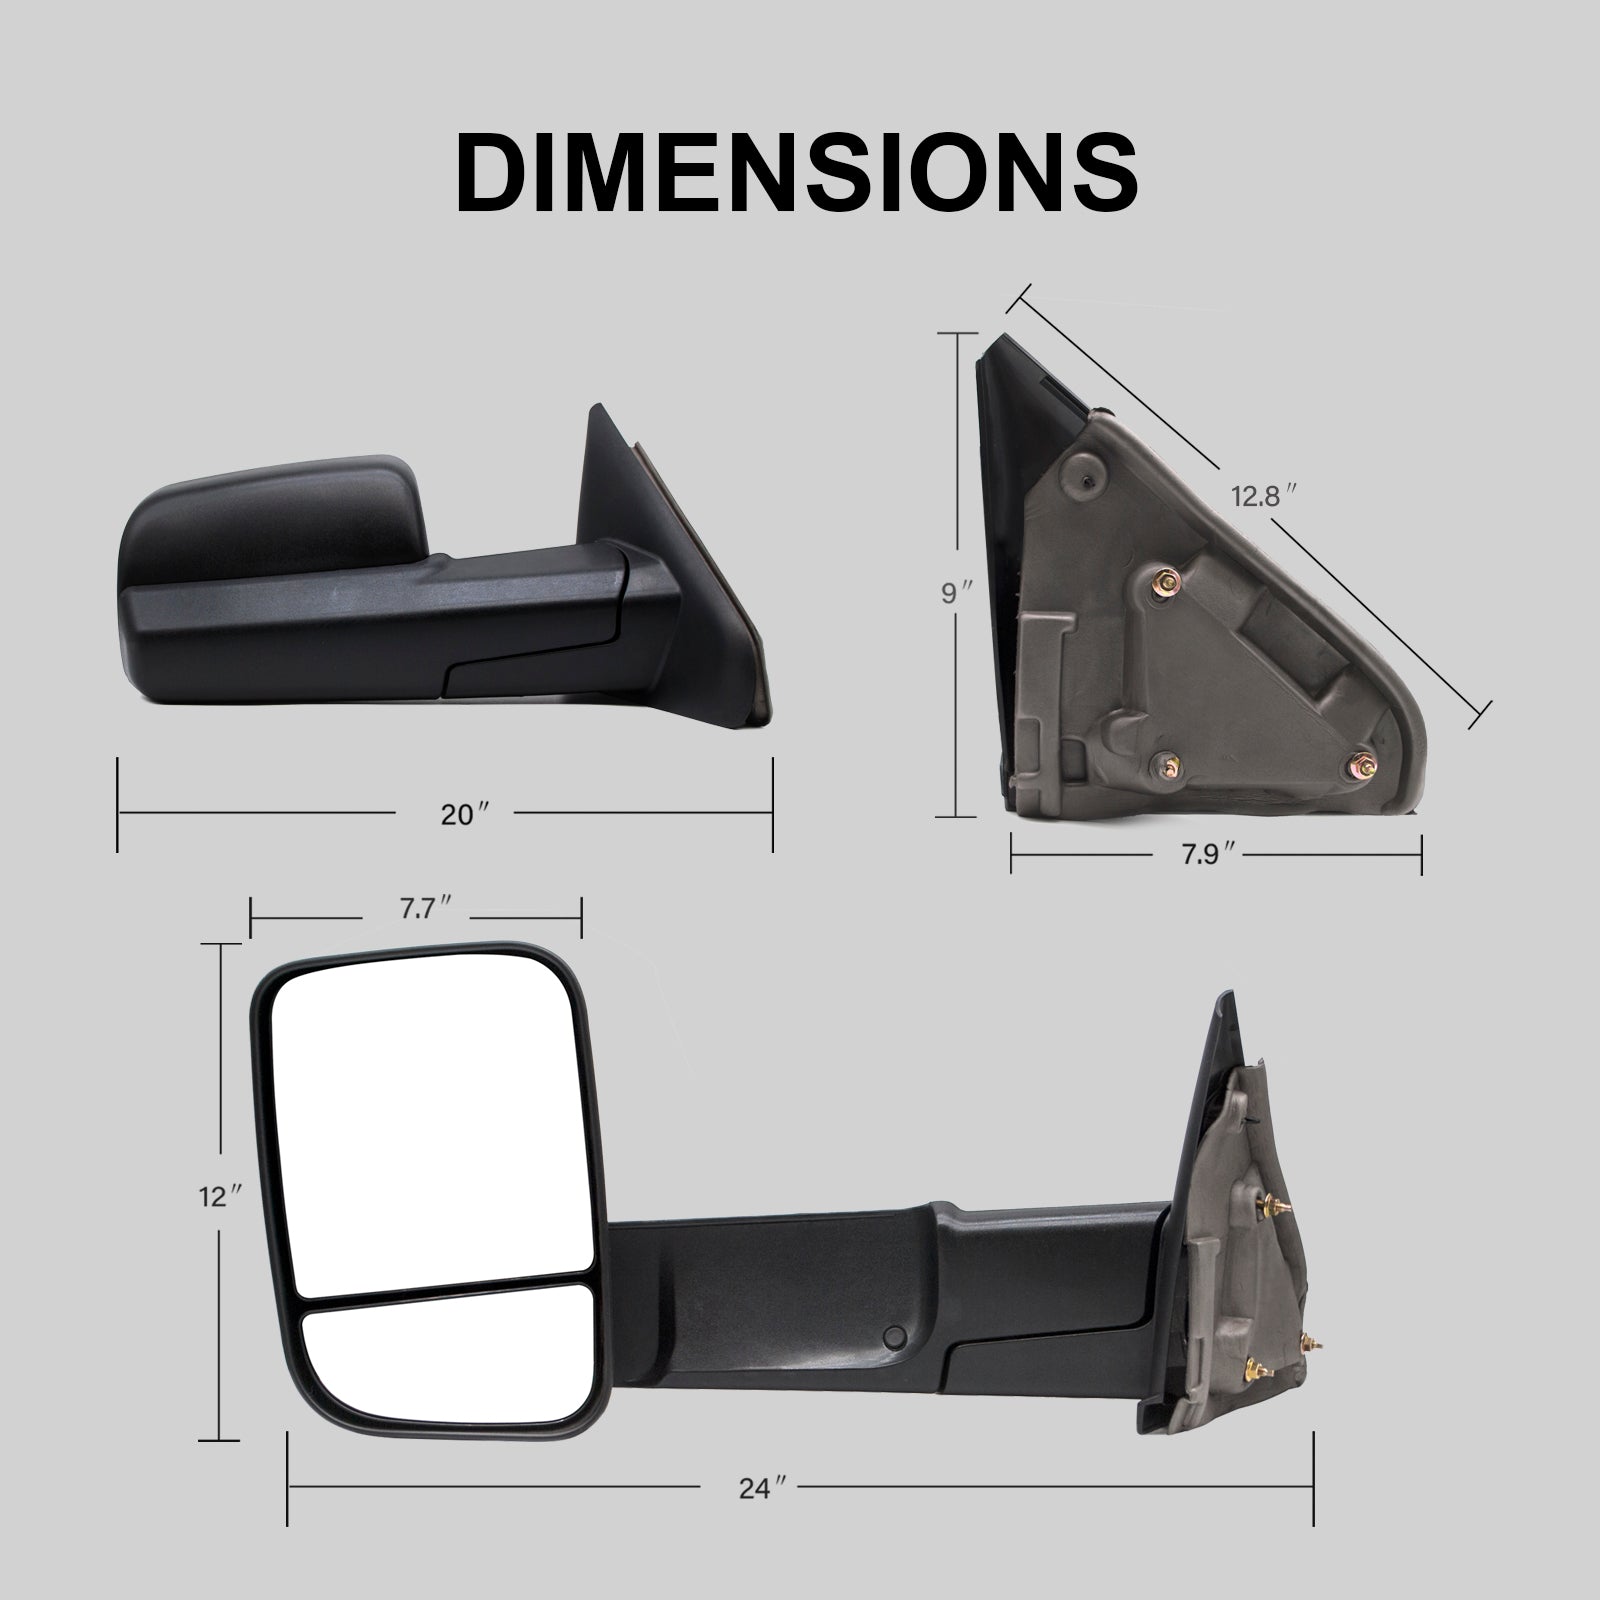 Towing Mirrors for 2002-2008 Dodge Ram 1500, 2003-2009 Dodge Ram 2500/3500, Pickup Truck Manual Folding and Flipping Black Housing 8B